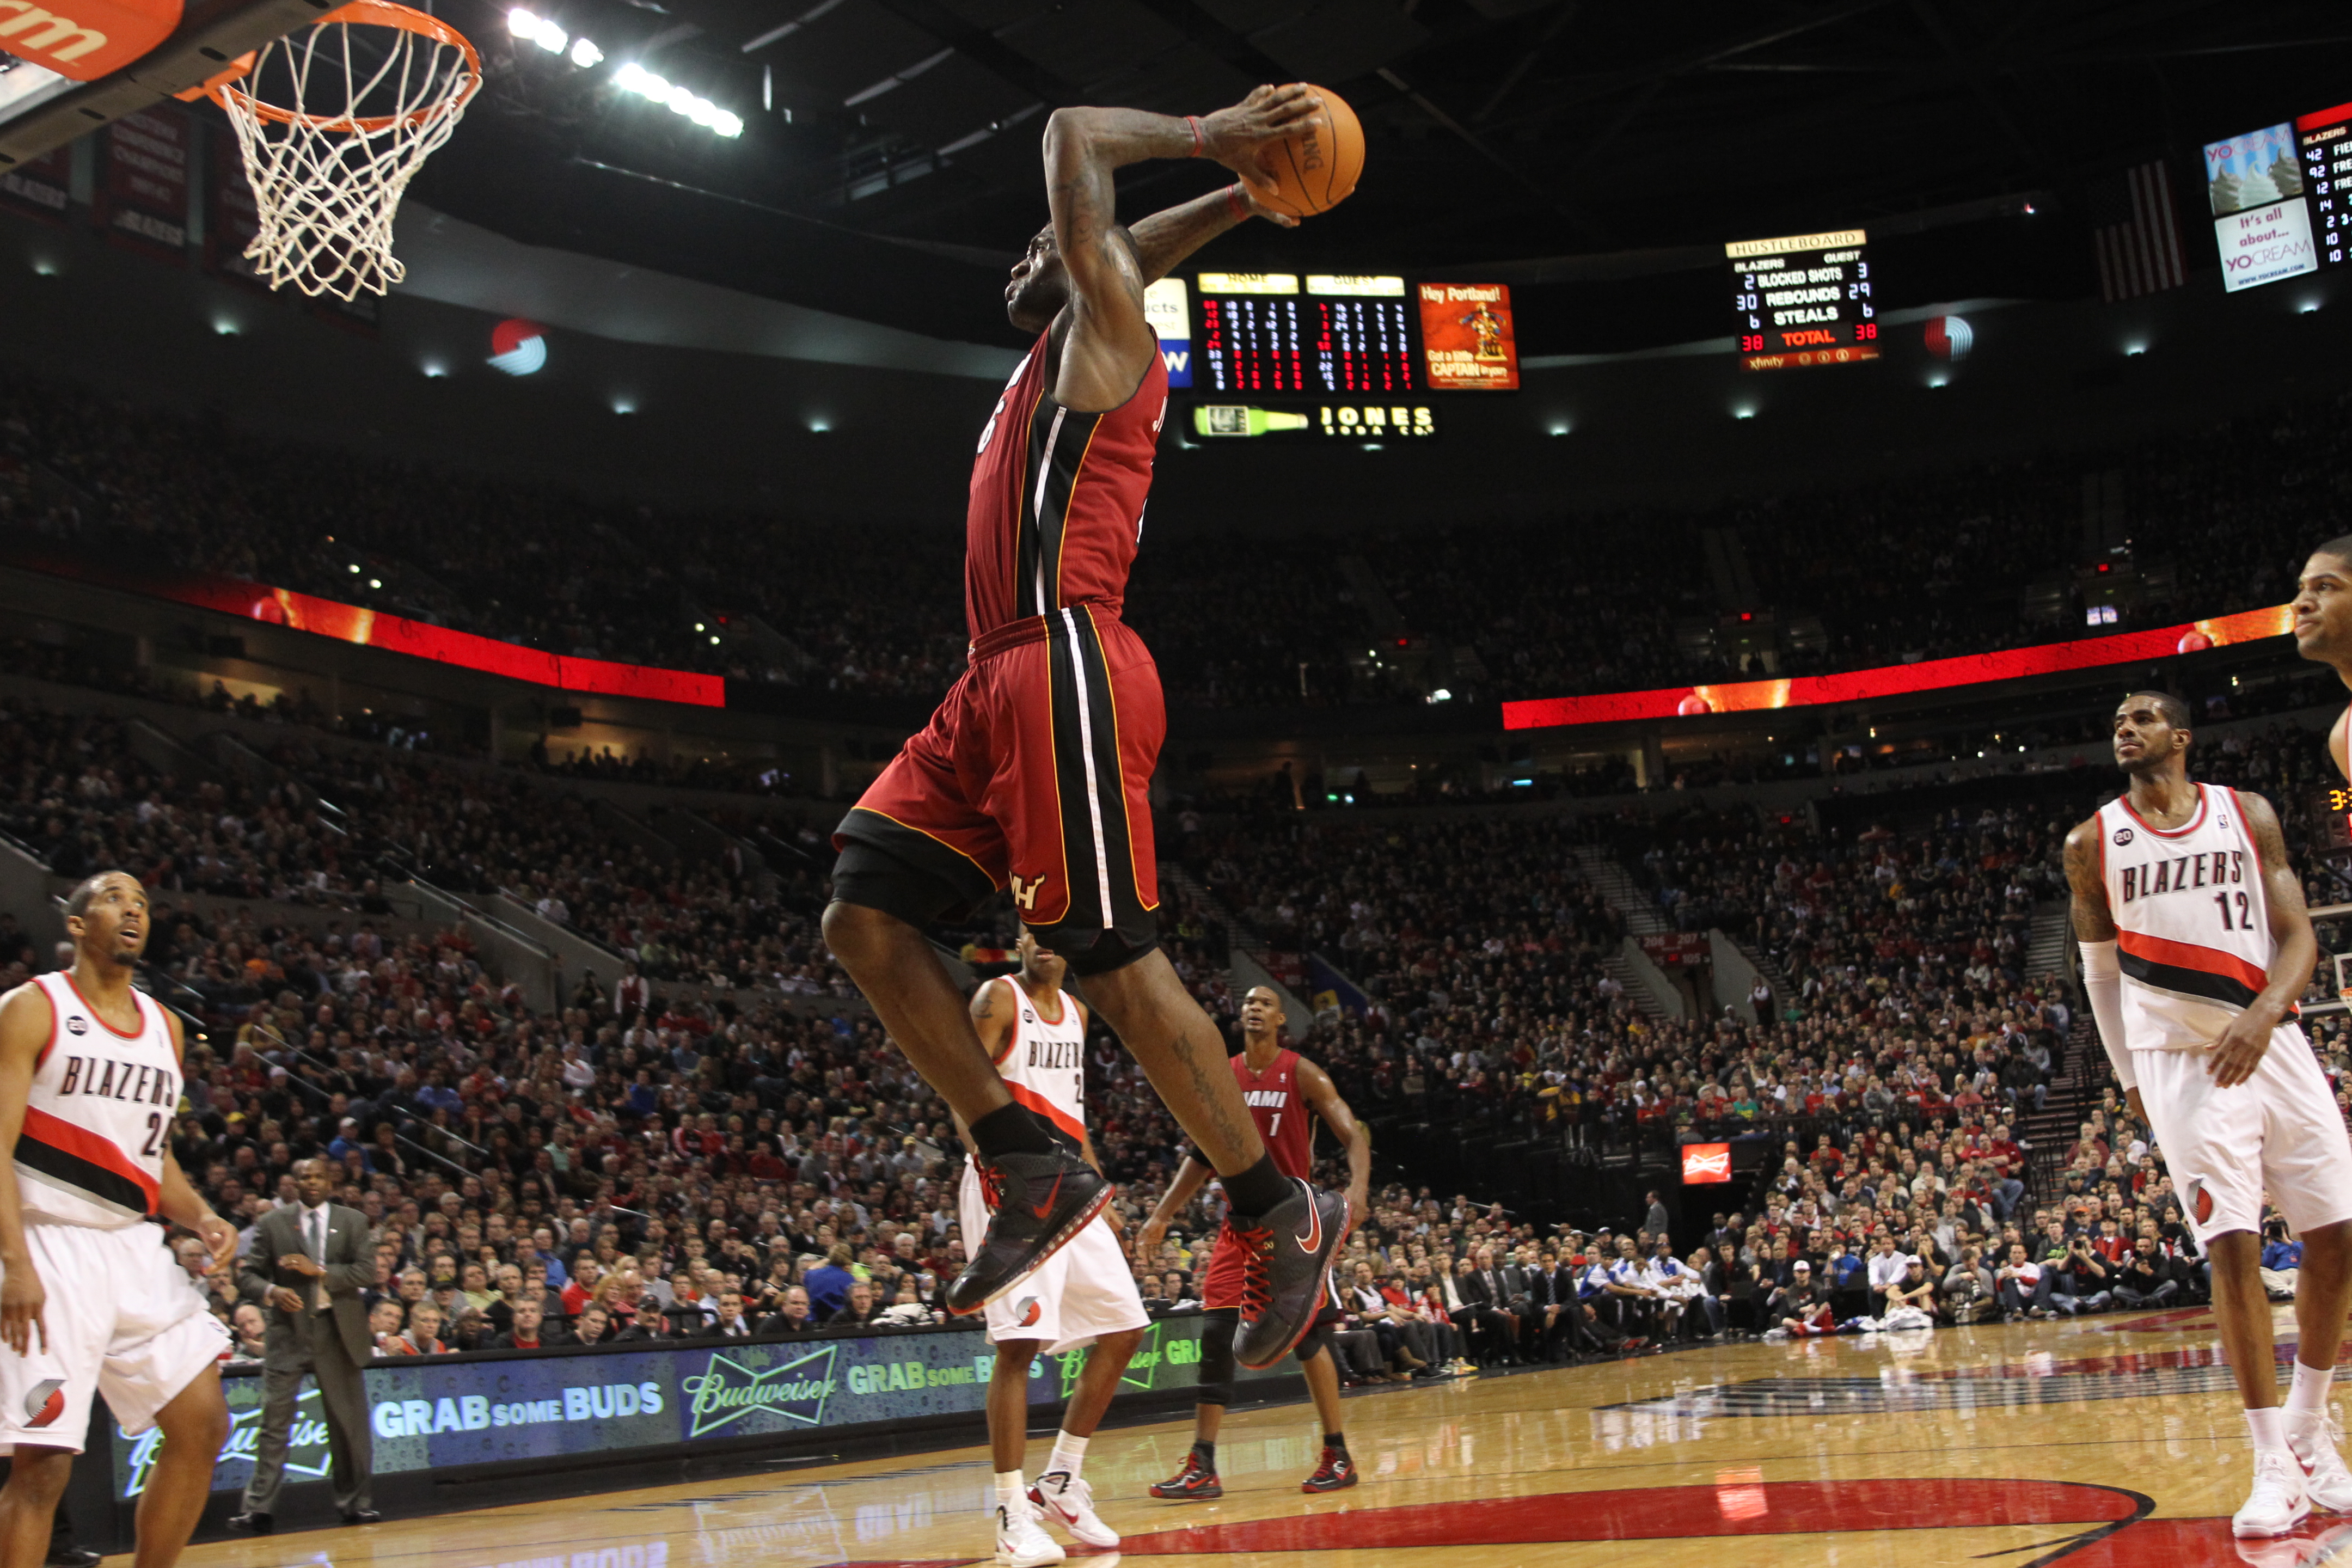 LeBron James of the Eastern Conference goes up for a dunk during